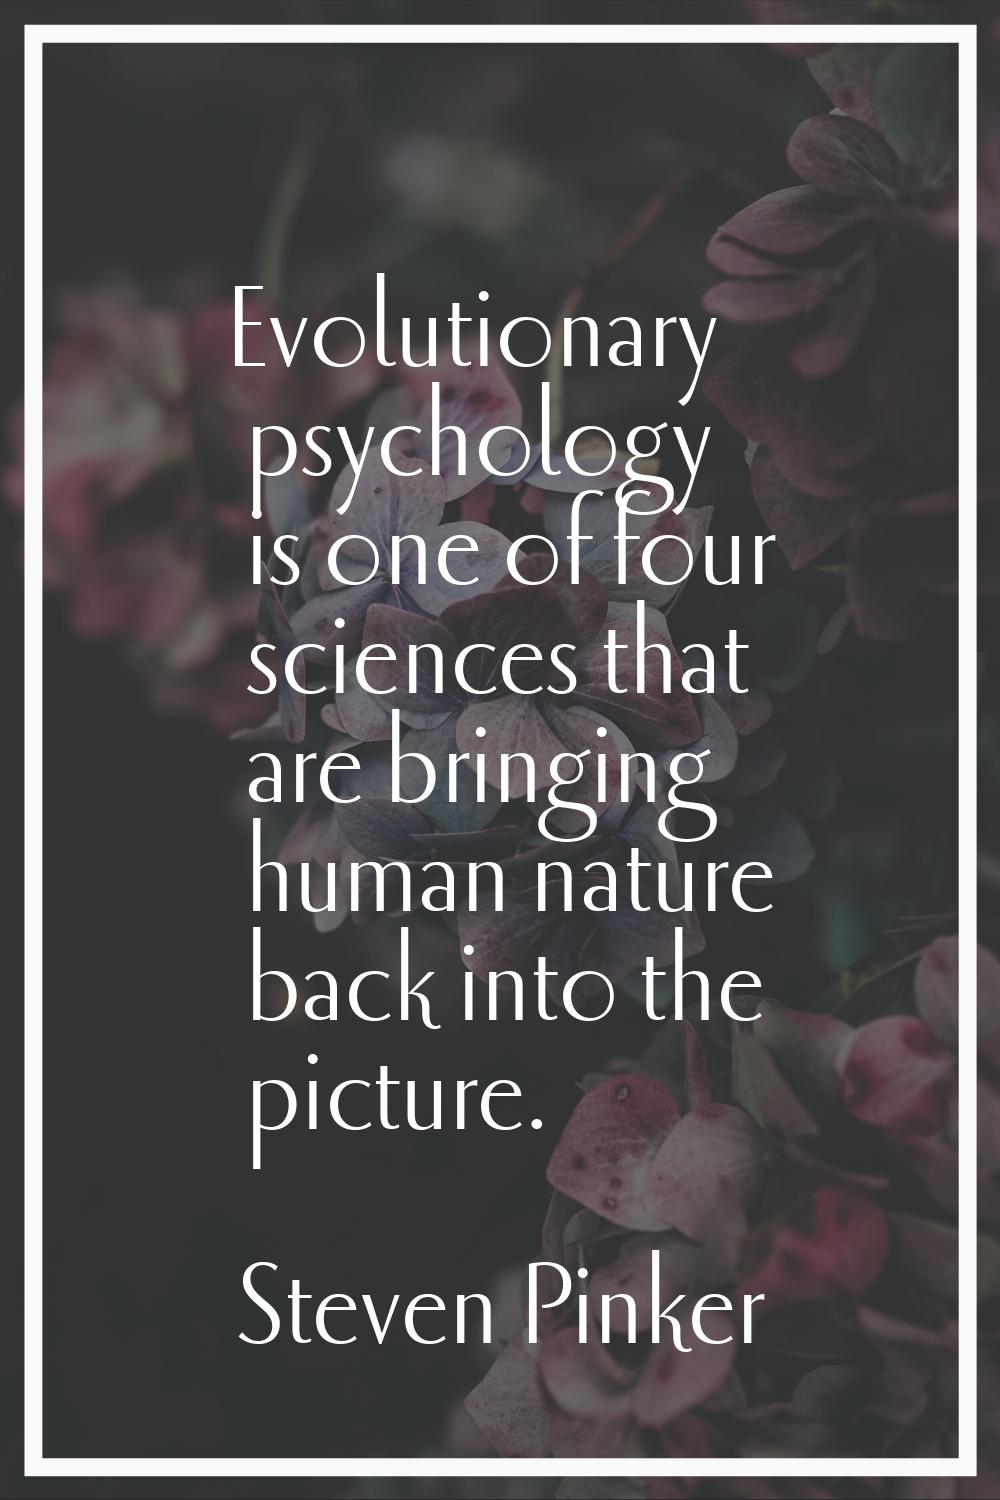 Evolutionary psychology is one of four sciences that are bringing human nature back into the pictur